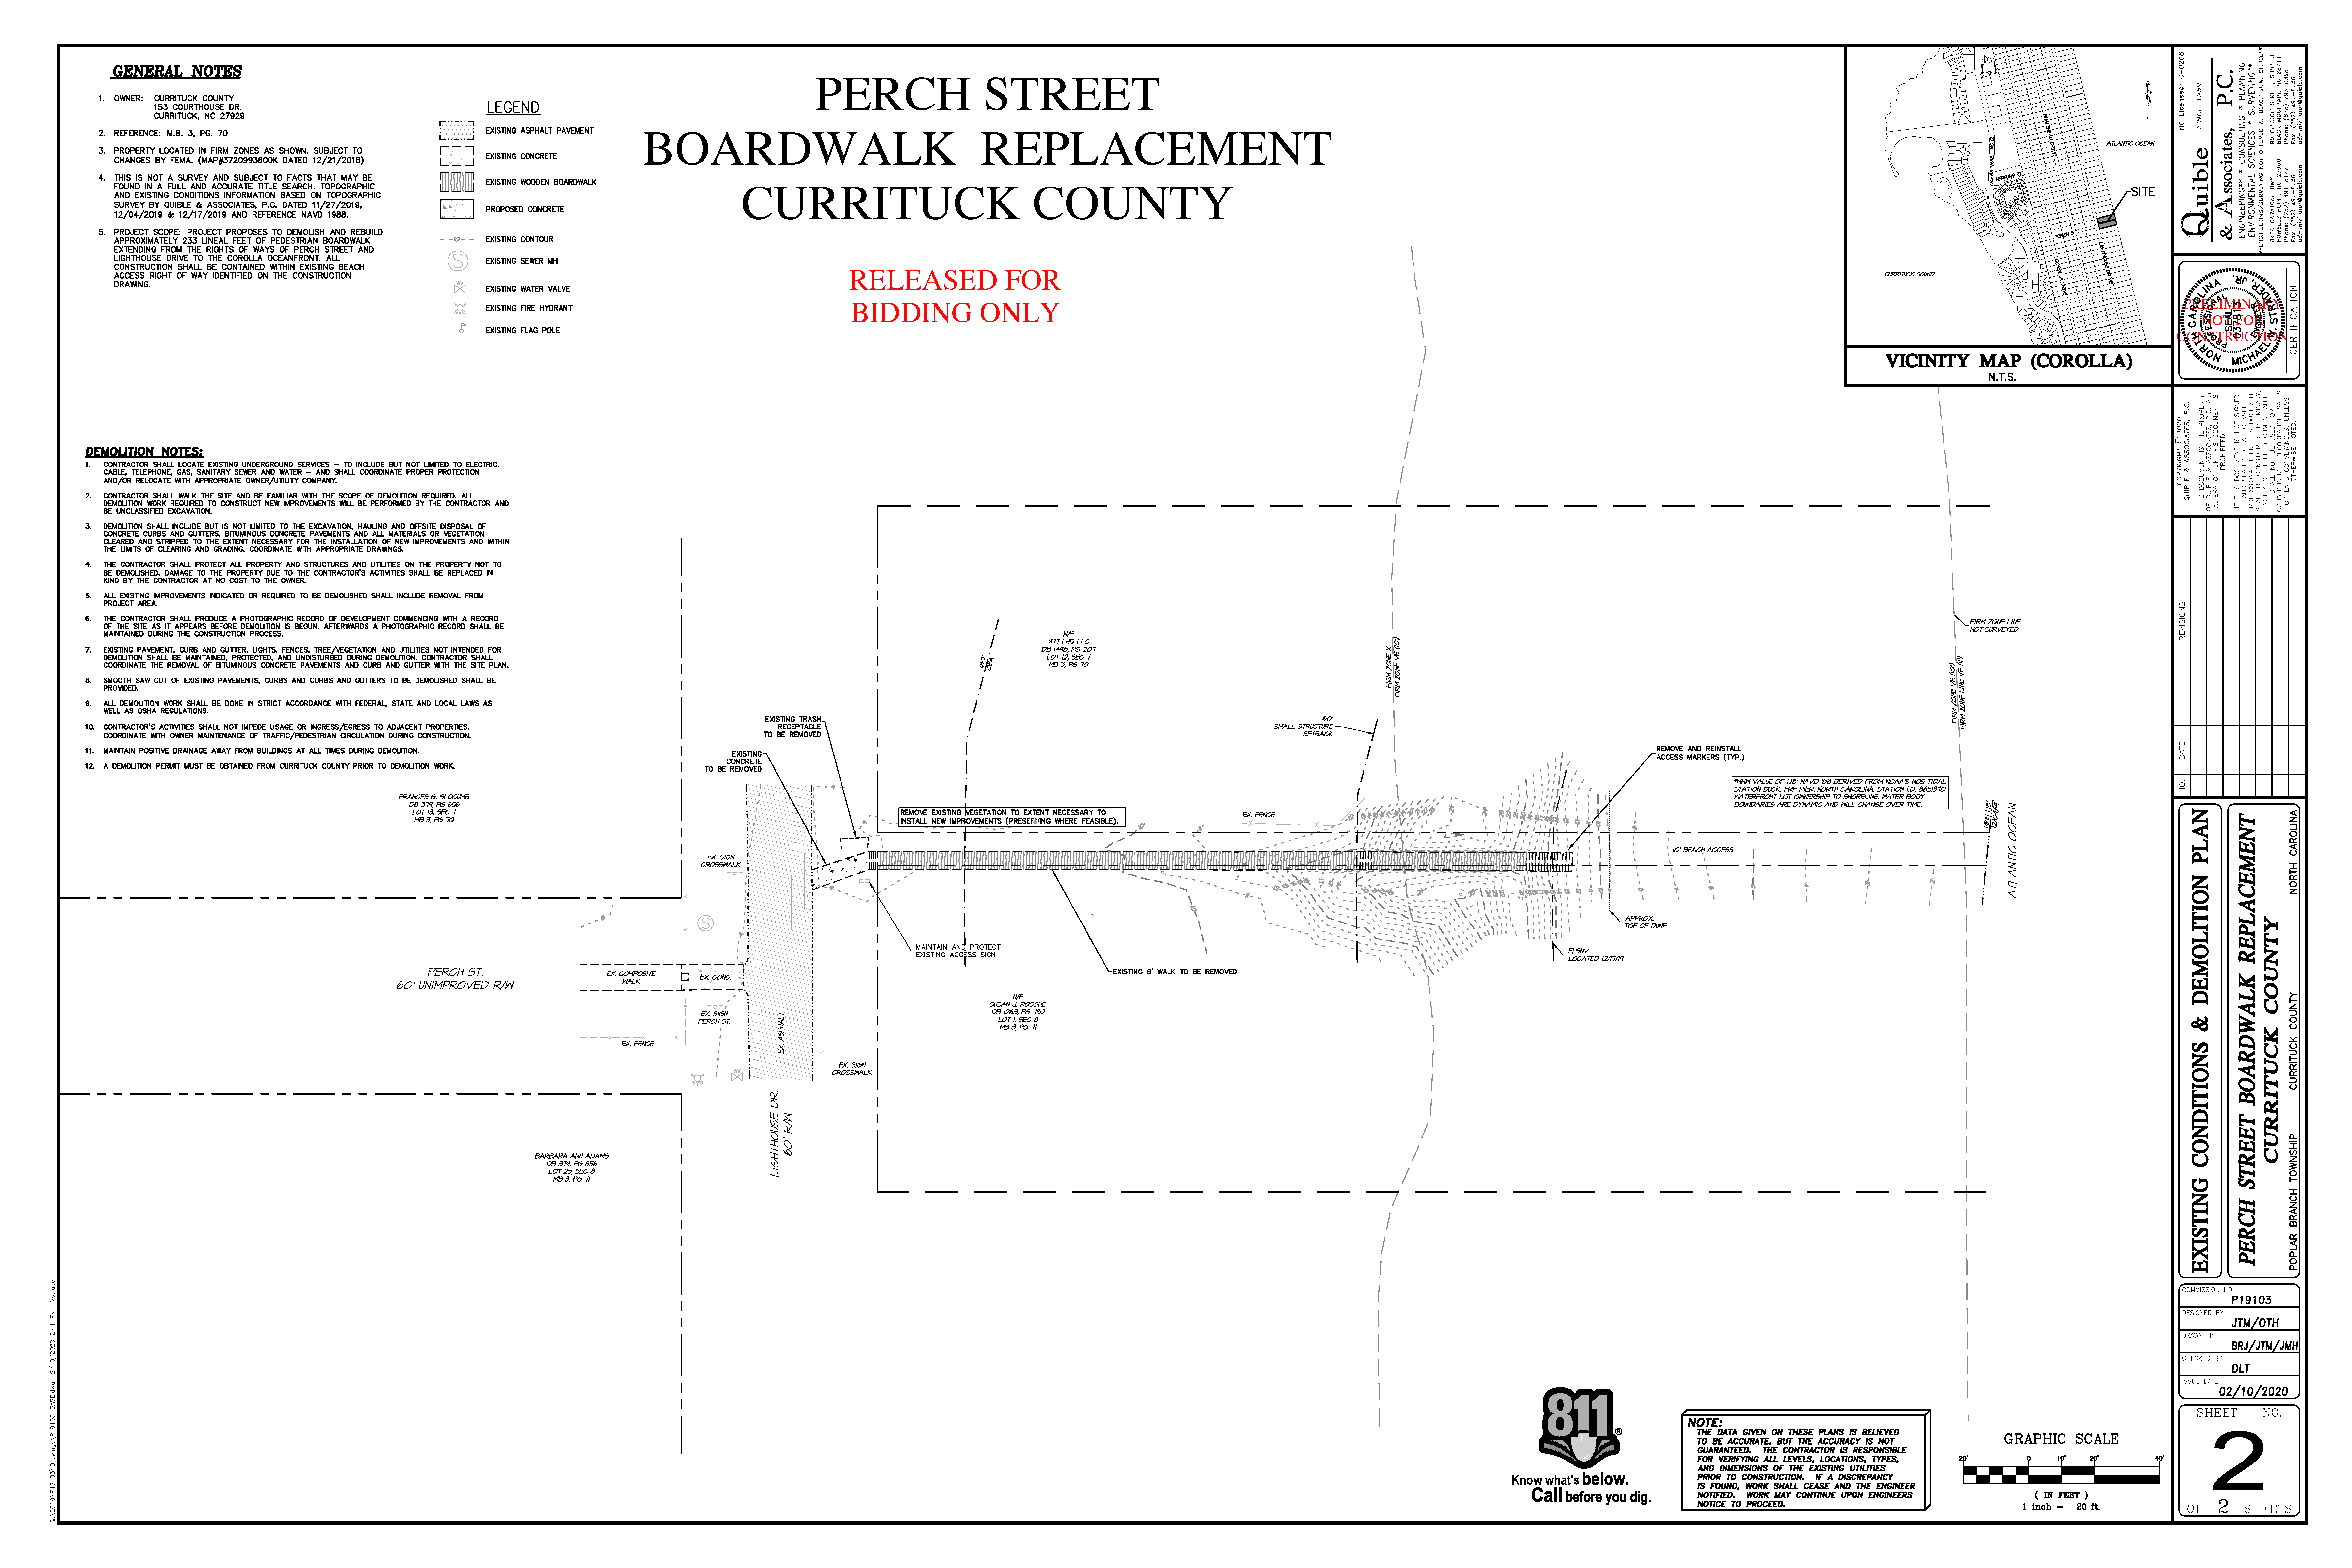 Perch Street Boardwalk Replacement Existing Conditions & Demolition Plan